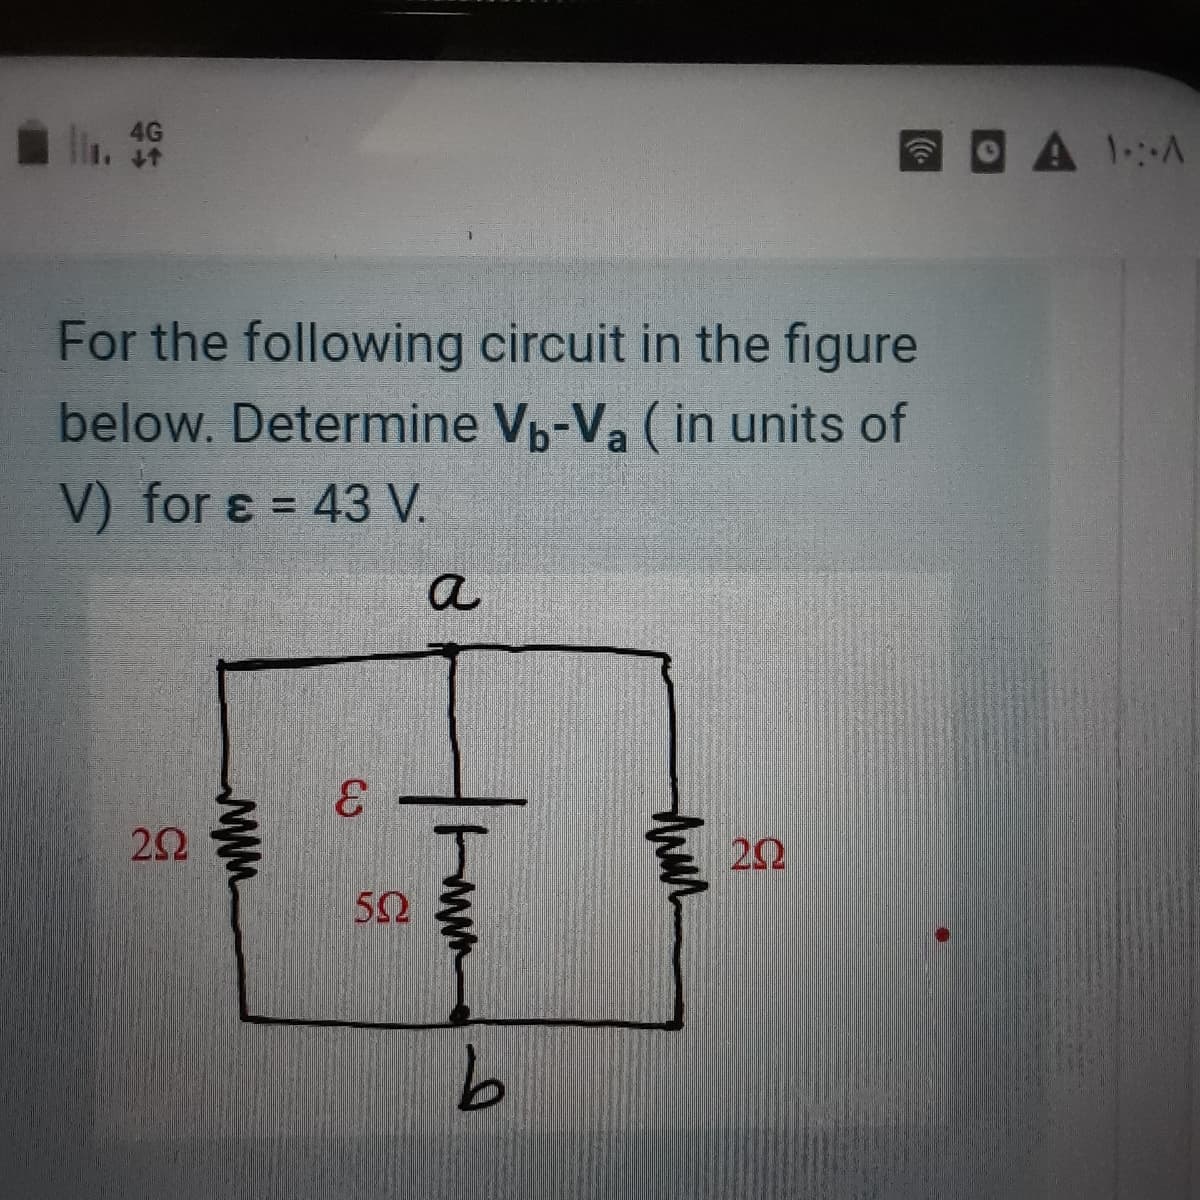 4G
A1A
For the following circuit in the figure
below. Determine Vp-Va ( in units of
V) for ɛ = 43 V.
a
E 20
50
9.
ww
wwM
